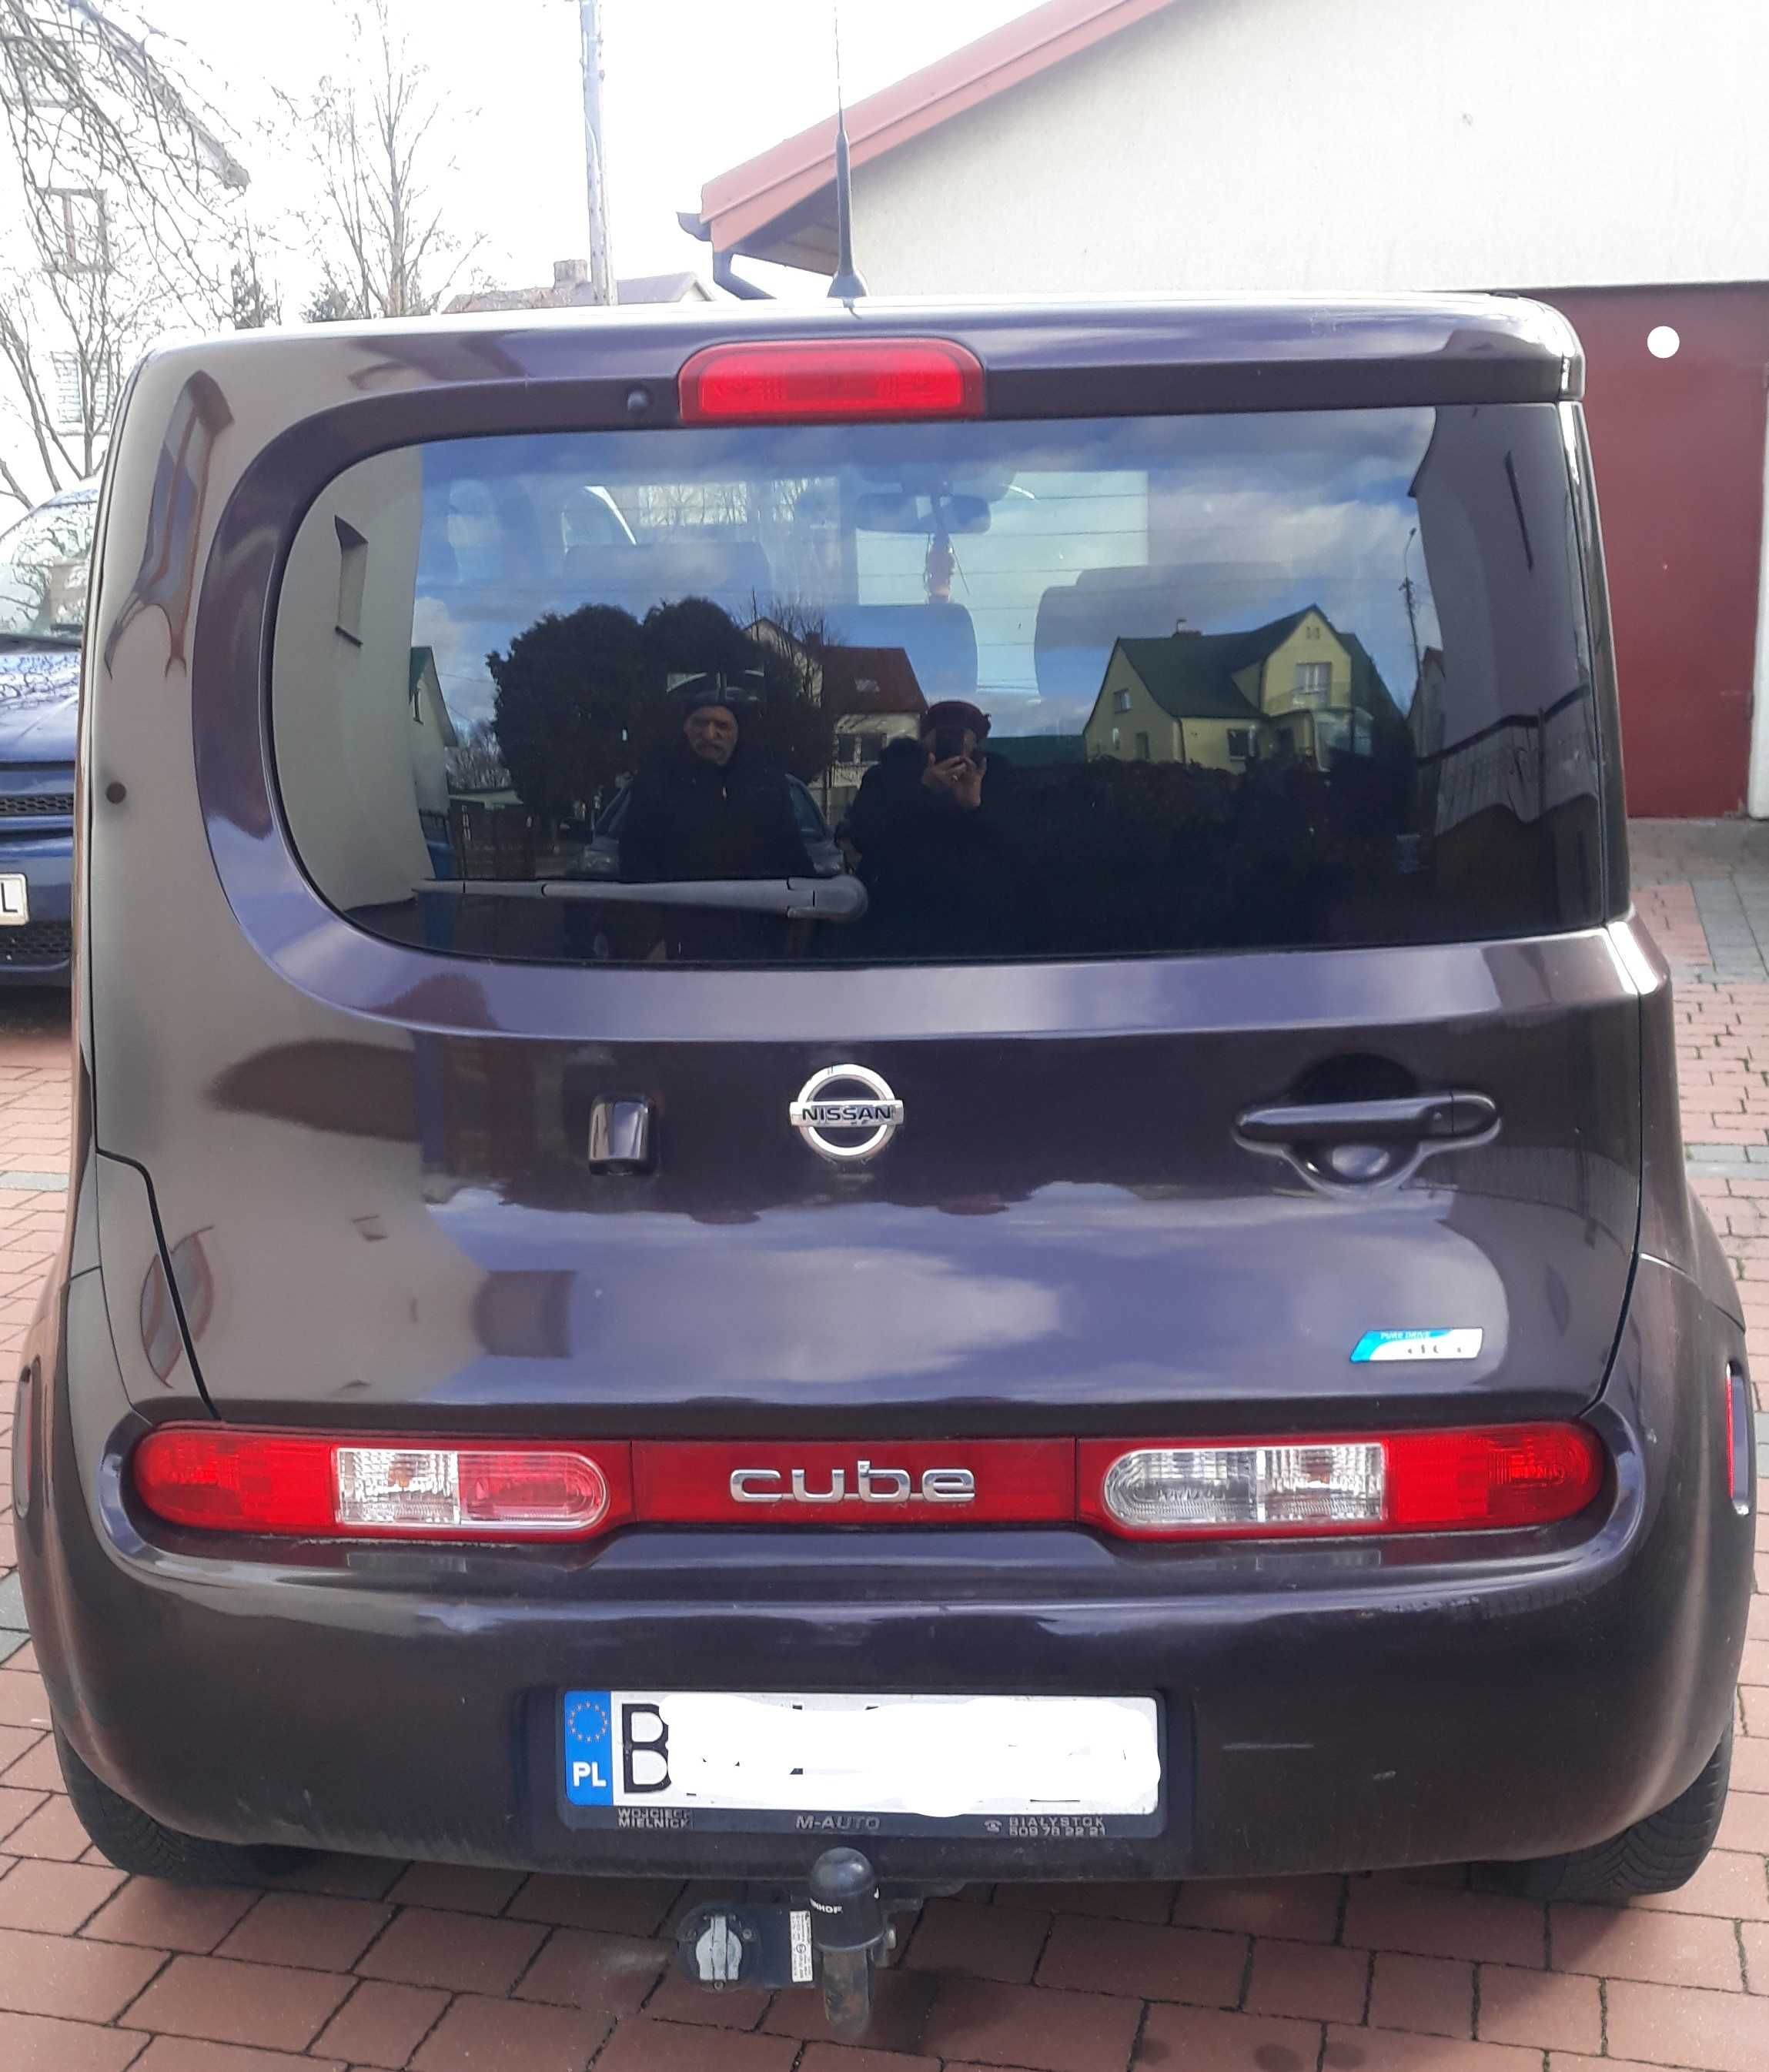 Nissan Cube, 2010r, 1,5 dci